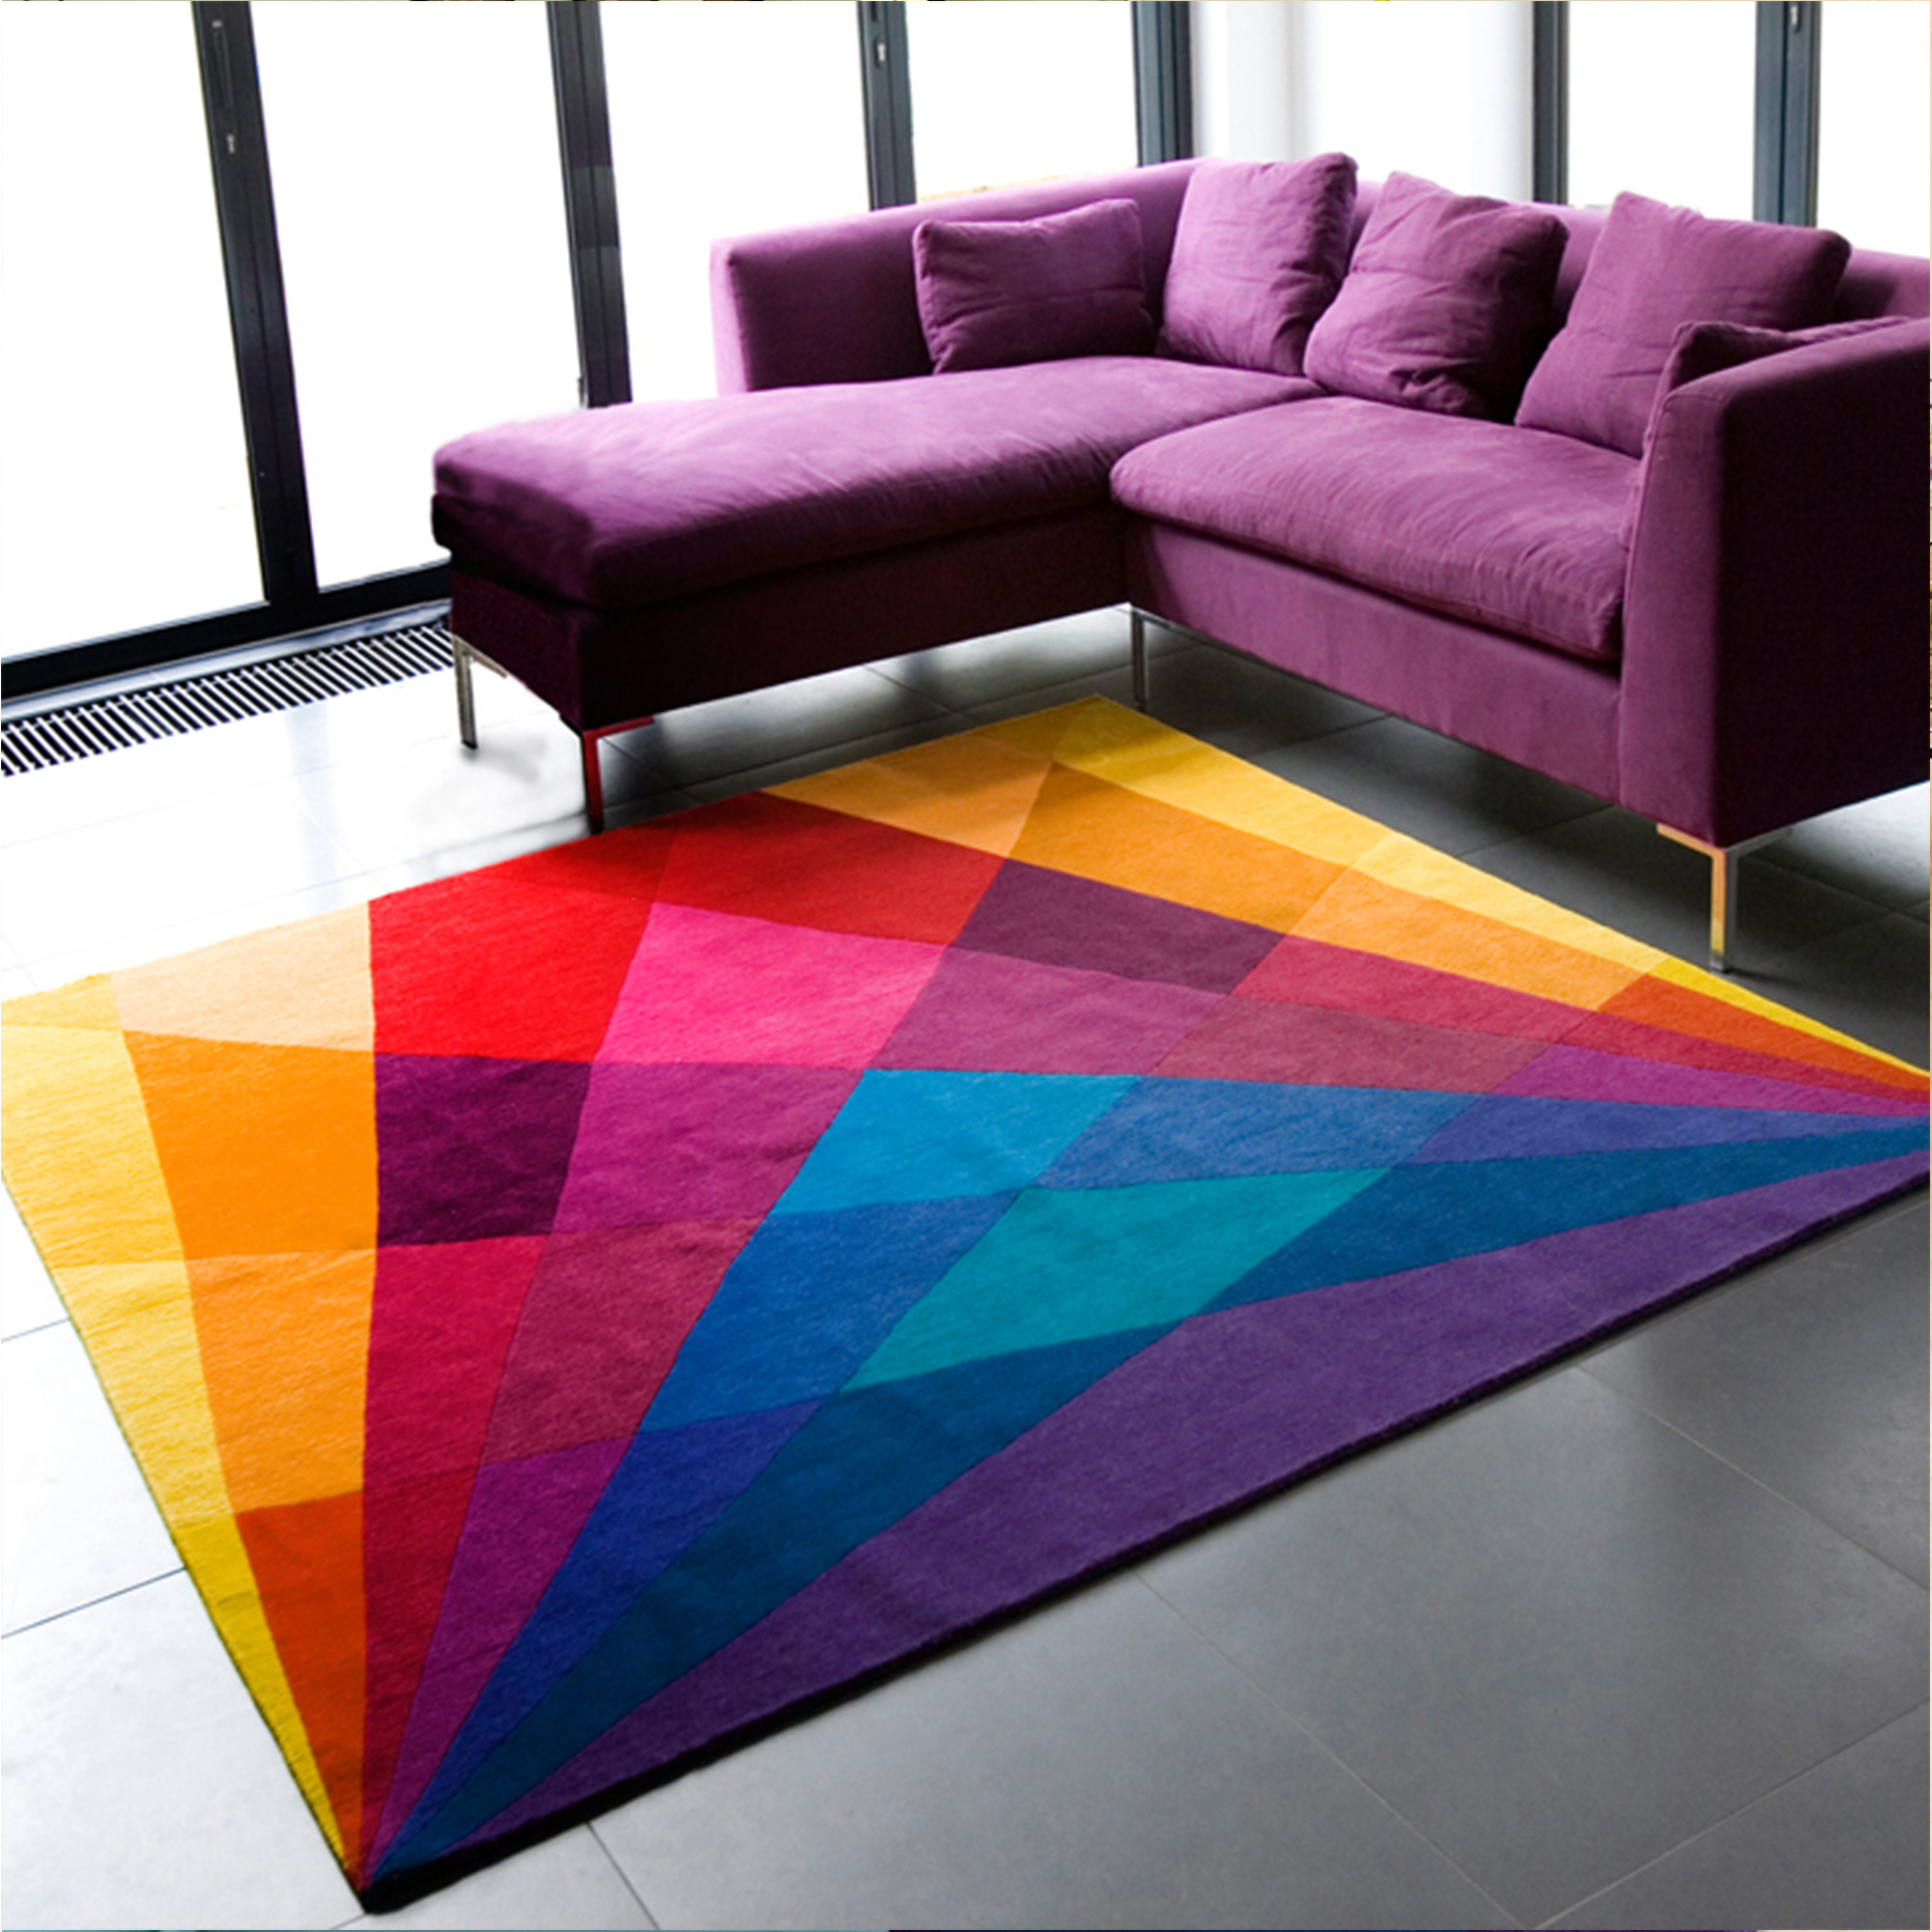 Using large contemporary rugs in your home - Sonya Winner Vibrant